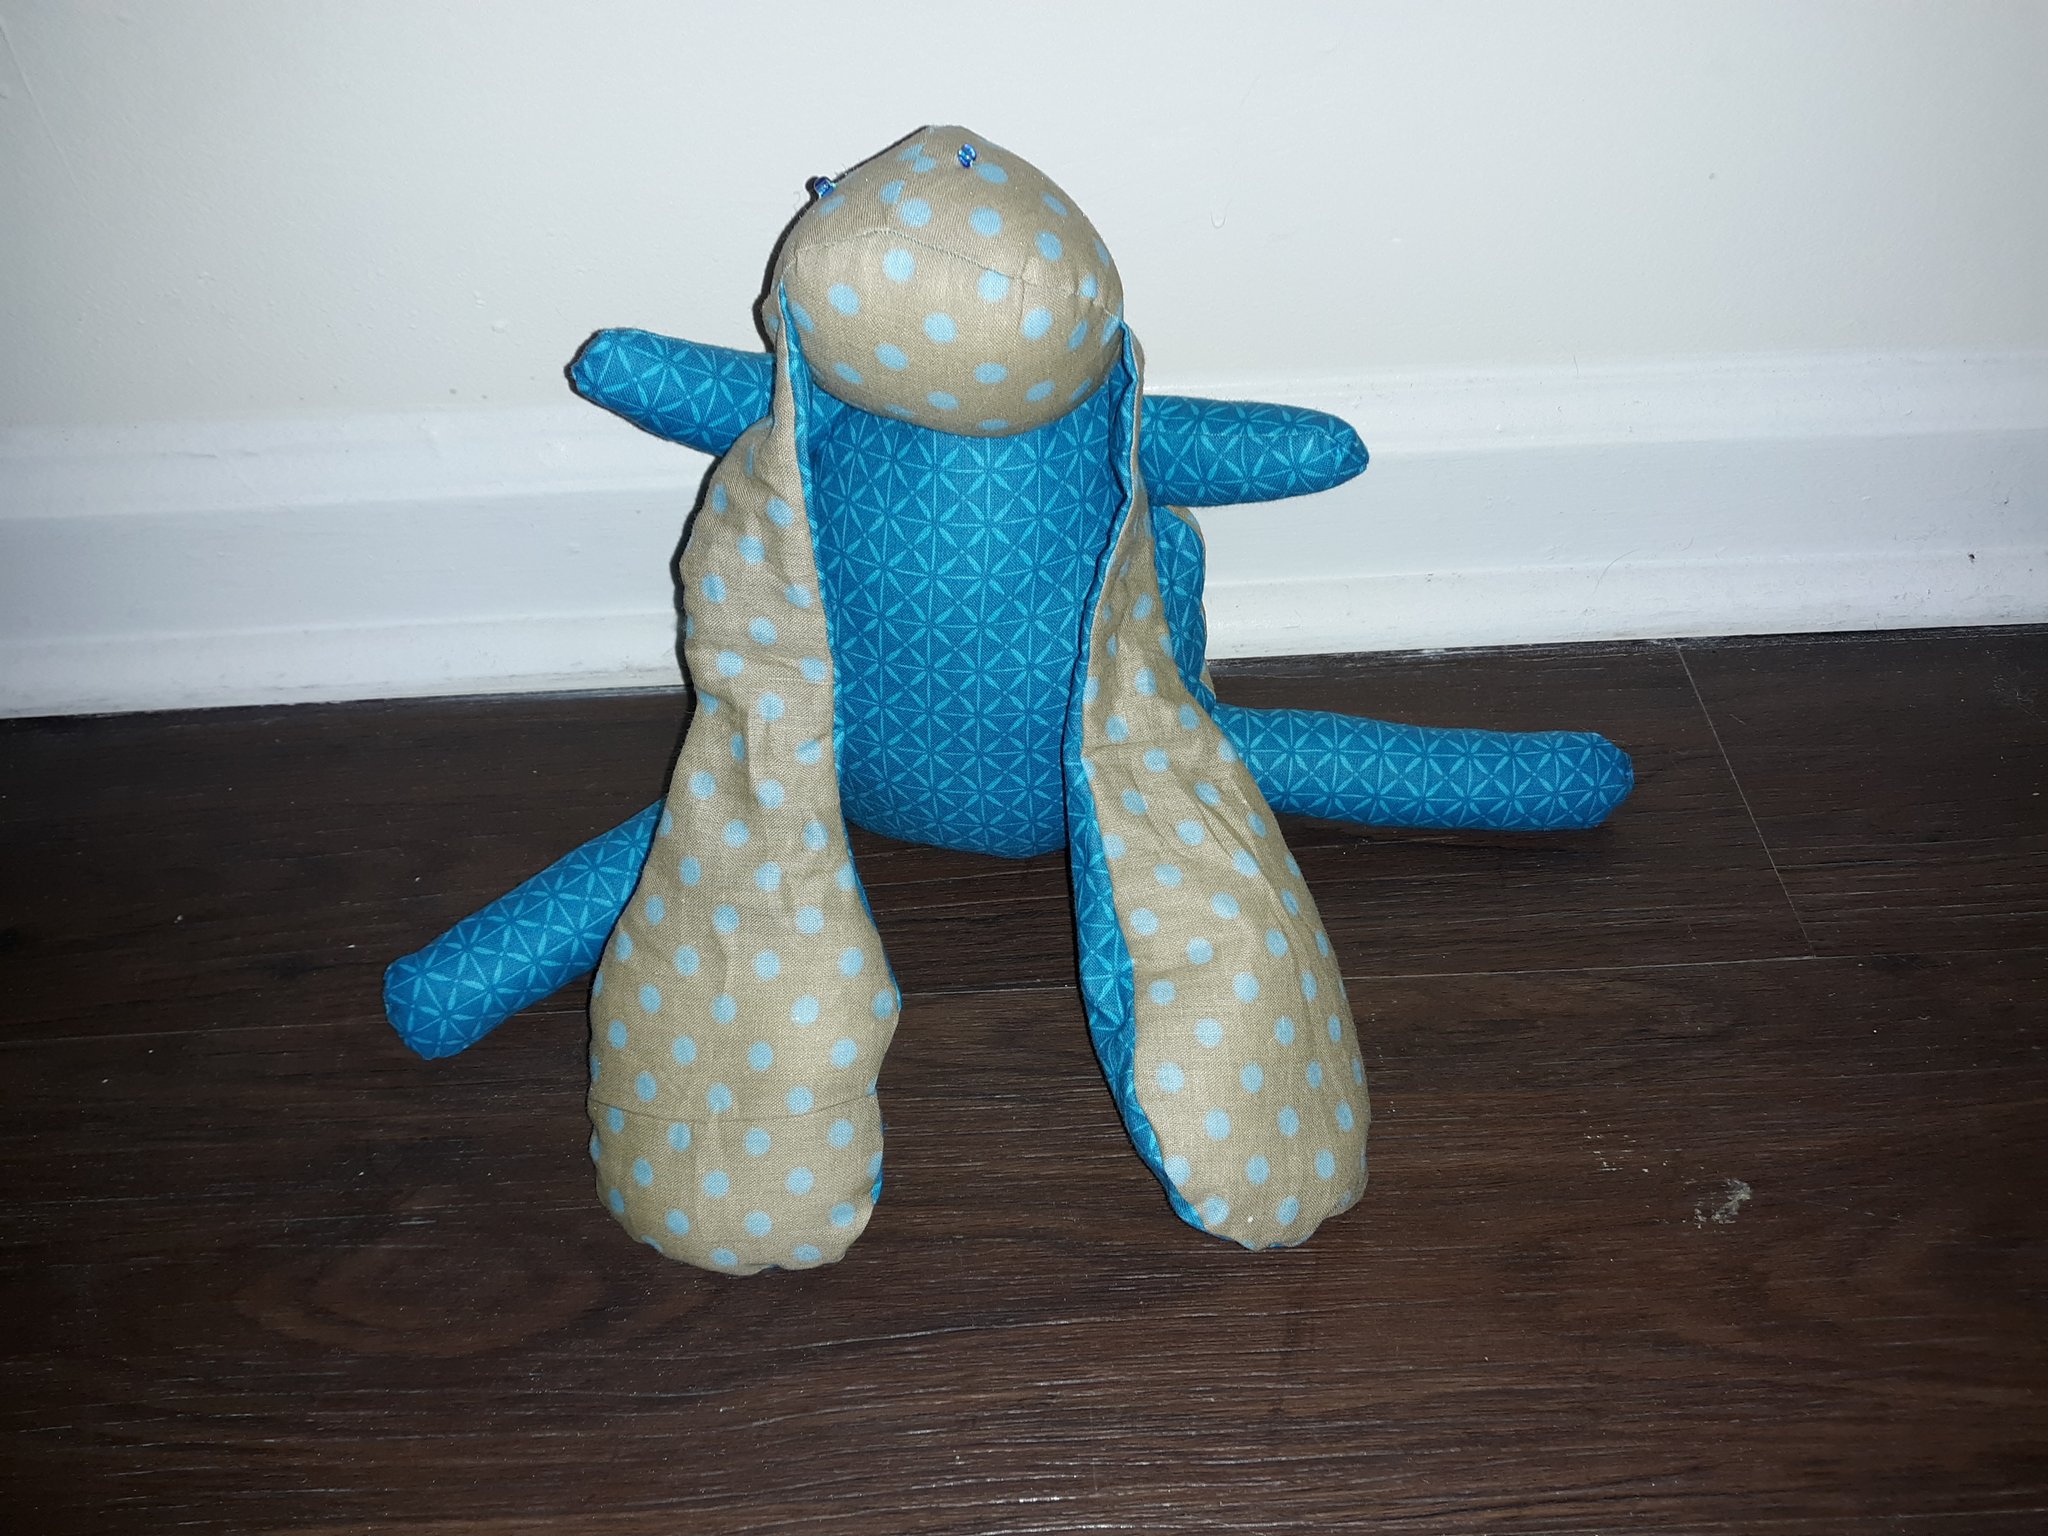 A blue and beige doll sitting on the ground. They have a small round head with long, floppy ears that touch the ground. Their body is larger than their head, but shorter than their ears. They have four short legs coming out of their body. Their head is of a beige fabric with light blue polka dots. They have two tiny blue beads for eyes. The top of their is also made of the same fabric, but the underside is of a blue fabric that has a lighter blue pattern on top. Their belly and legs are made of the same blue fabric.